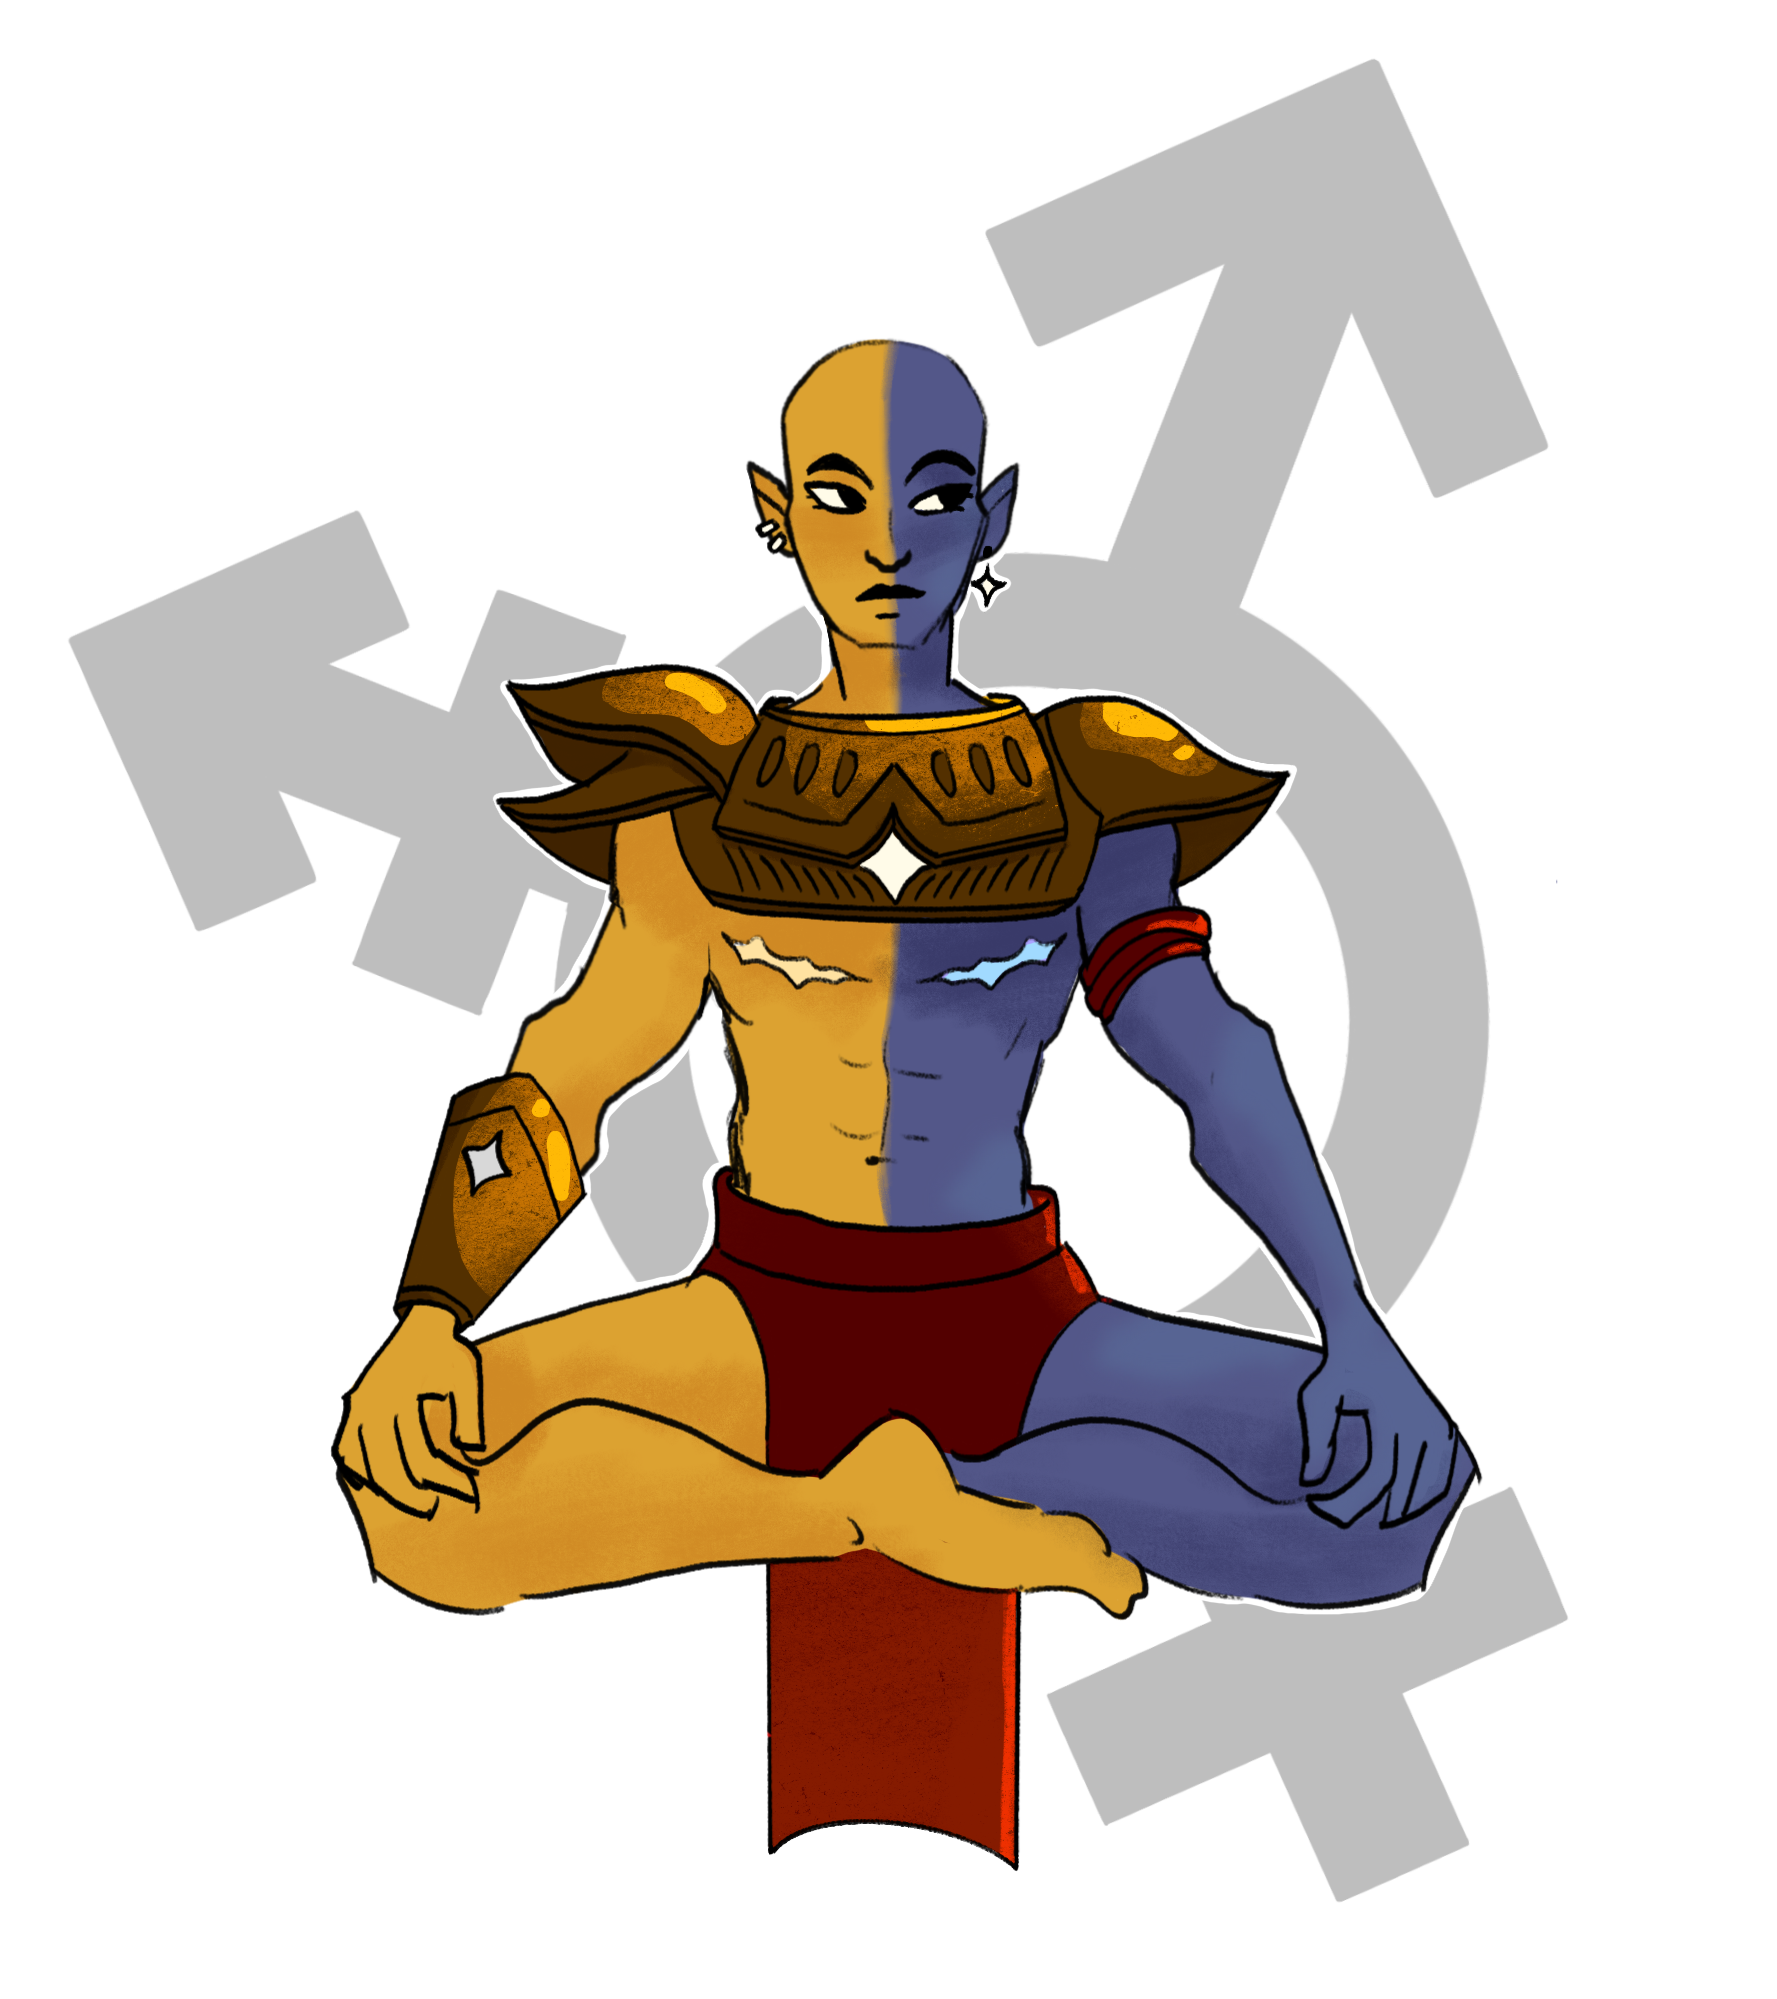 illustration of Vivec from Elder Scrolls depicted as transmasculine with top surgery scars, floating cross legged in front of the transgender symbol